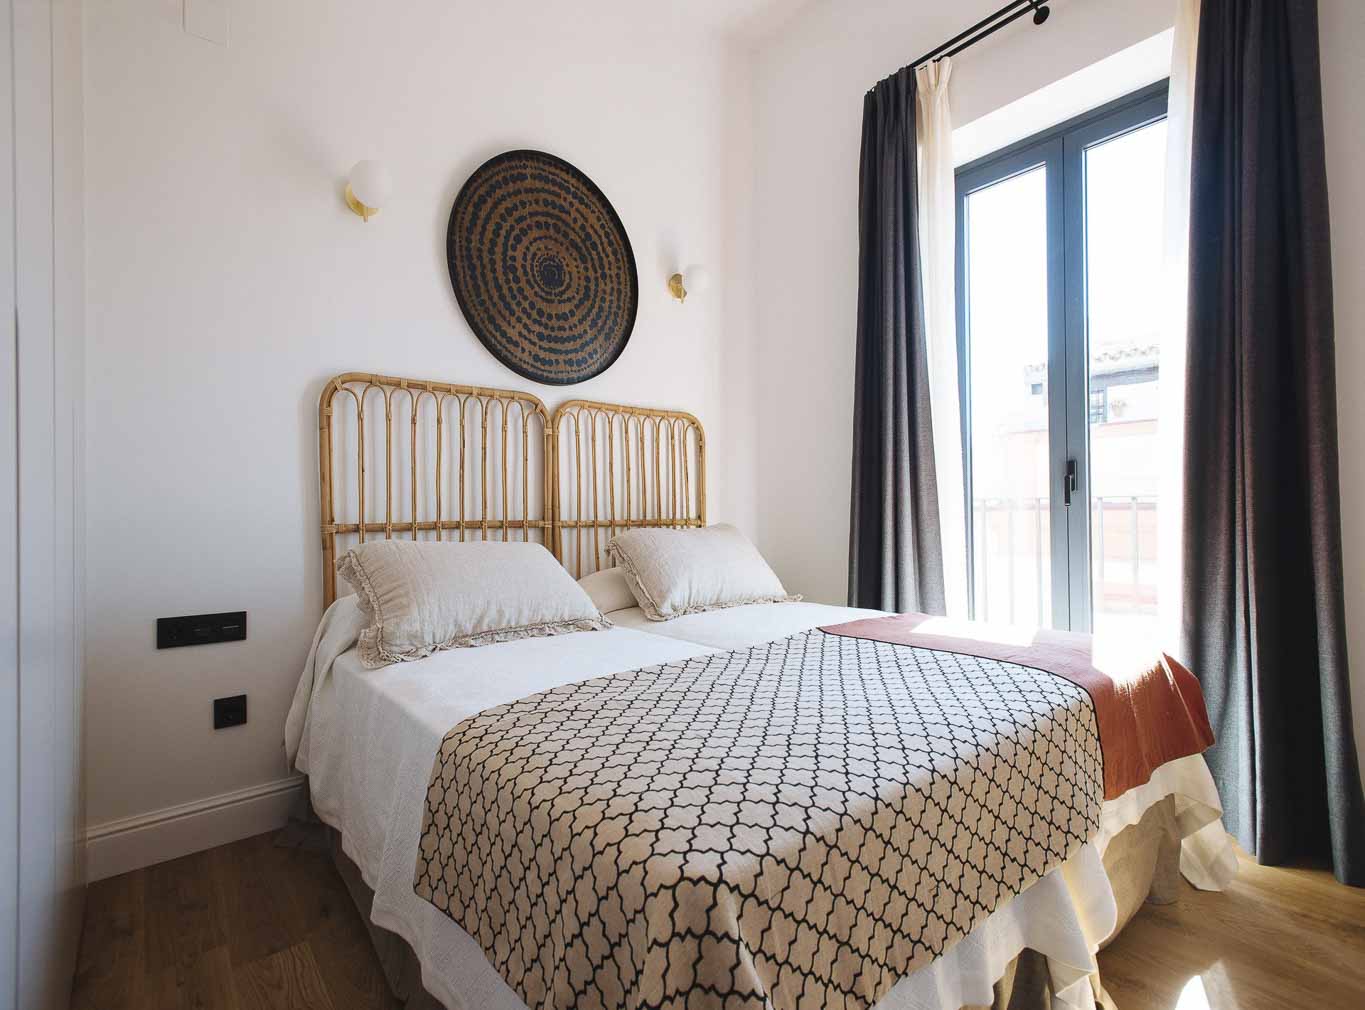 Family apartments in Seville